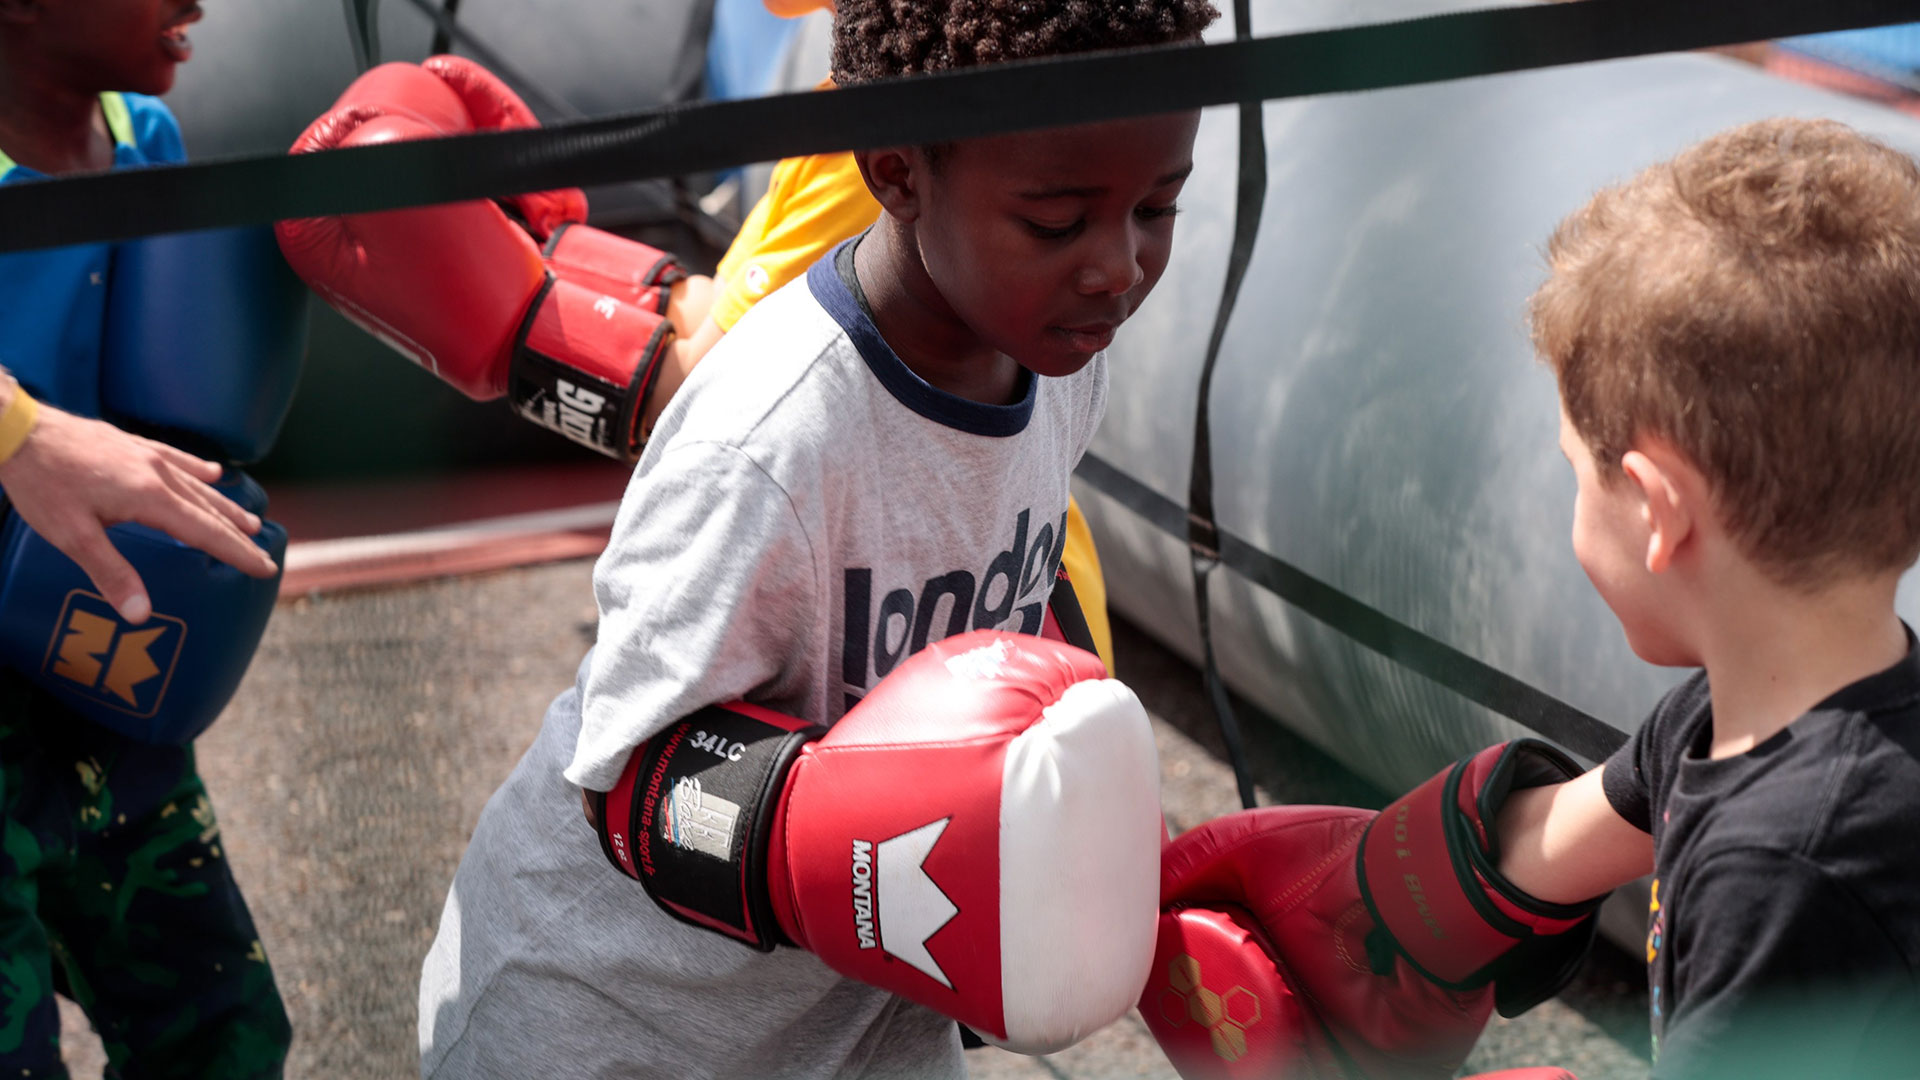 Children learn the sport of boxing at Olympic Day 2022 (Paris 2024)